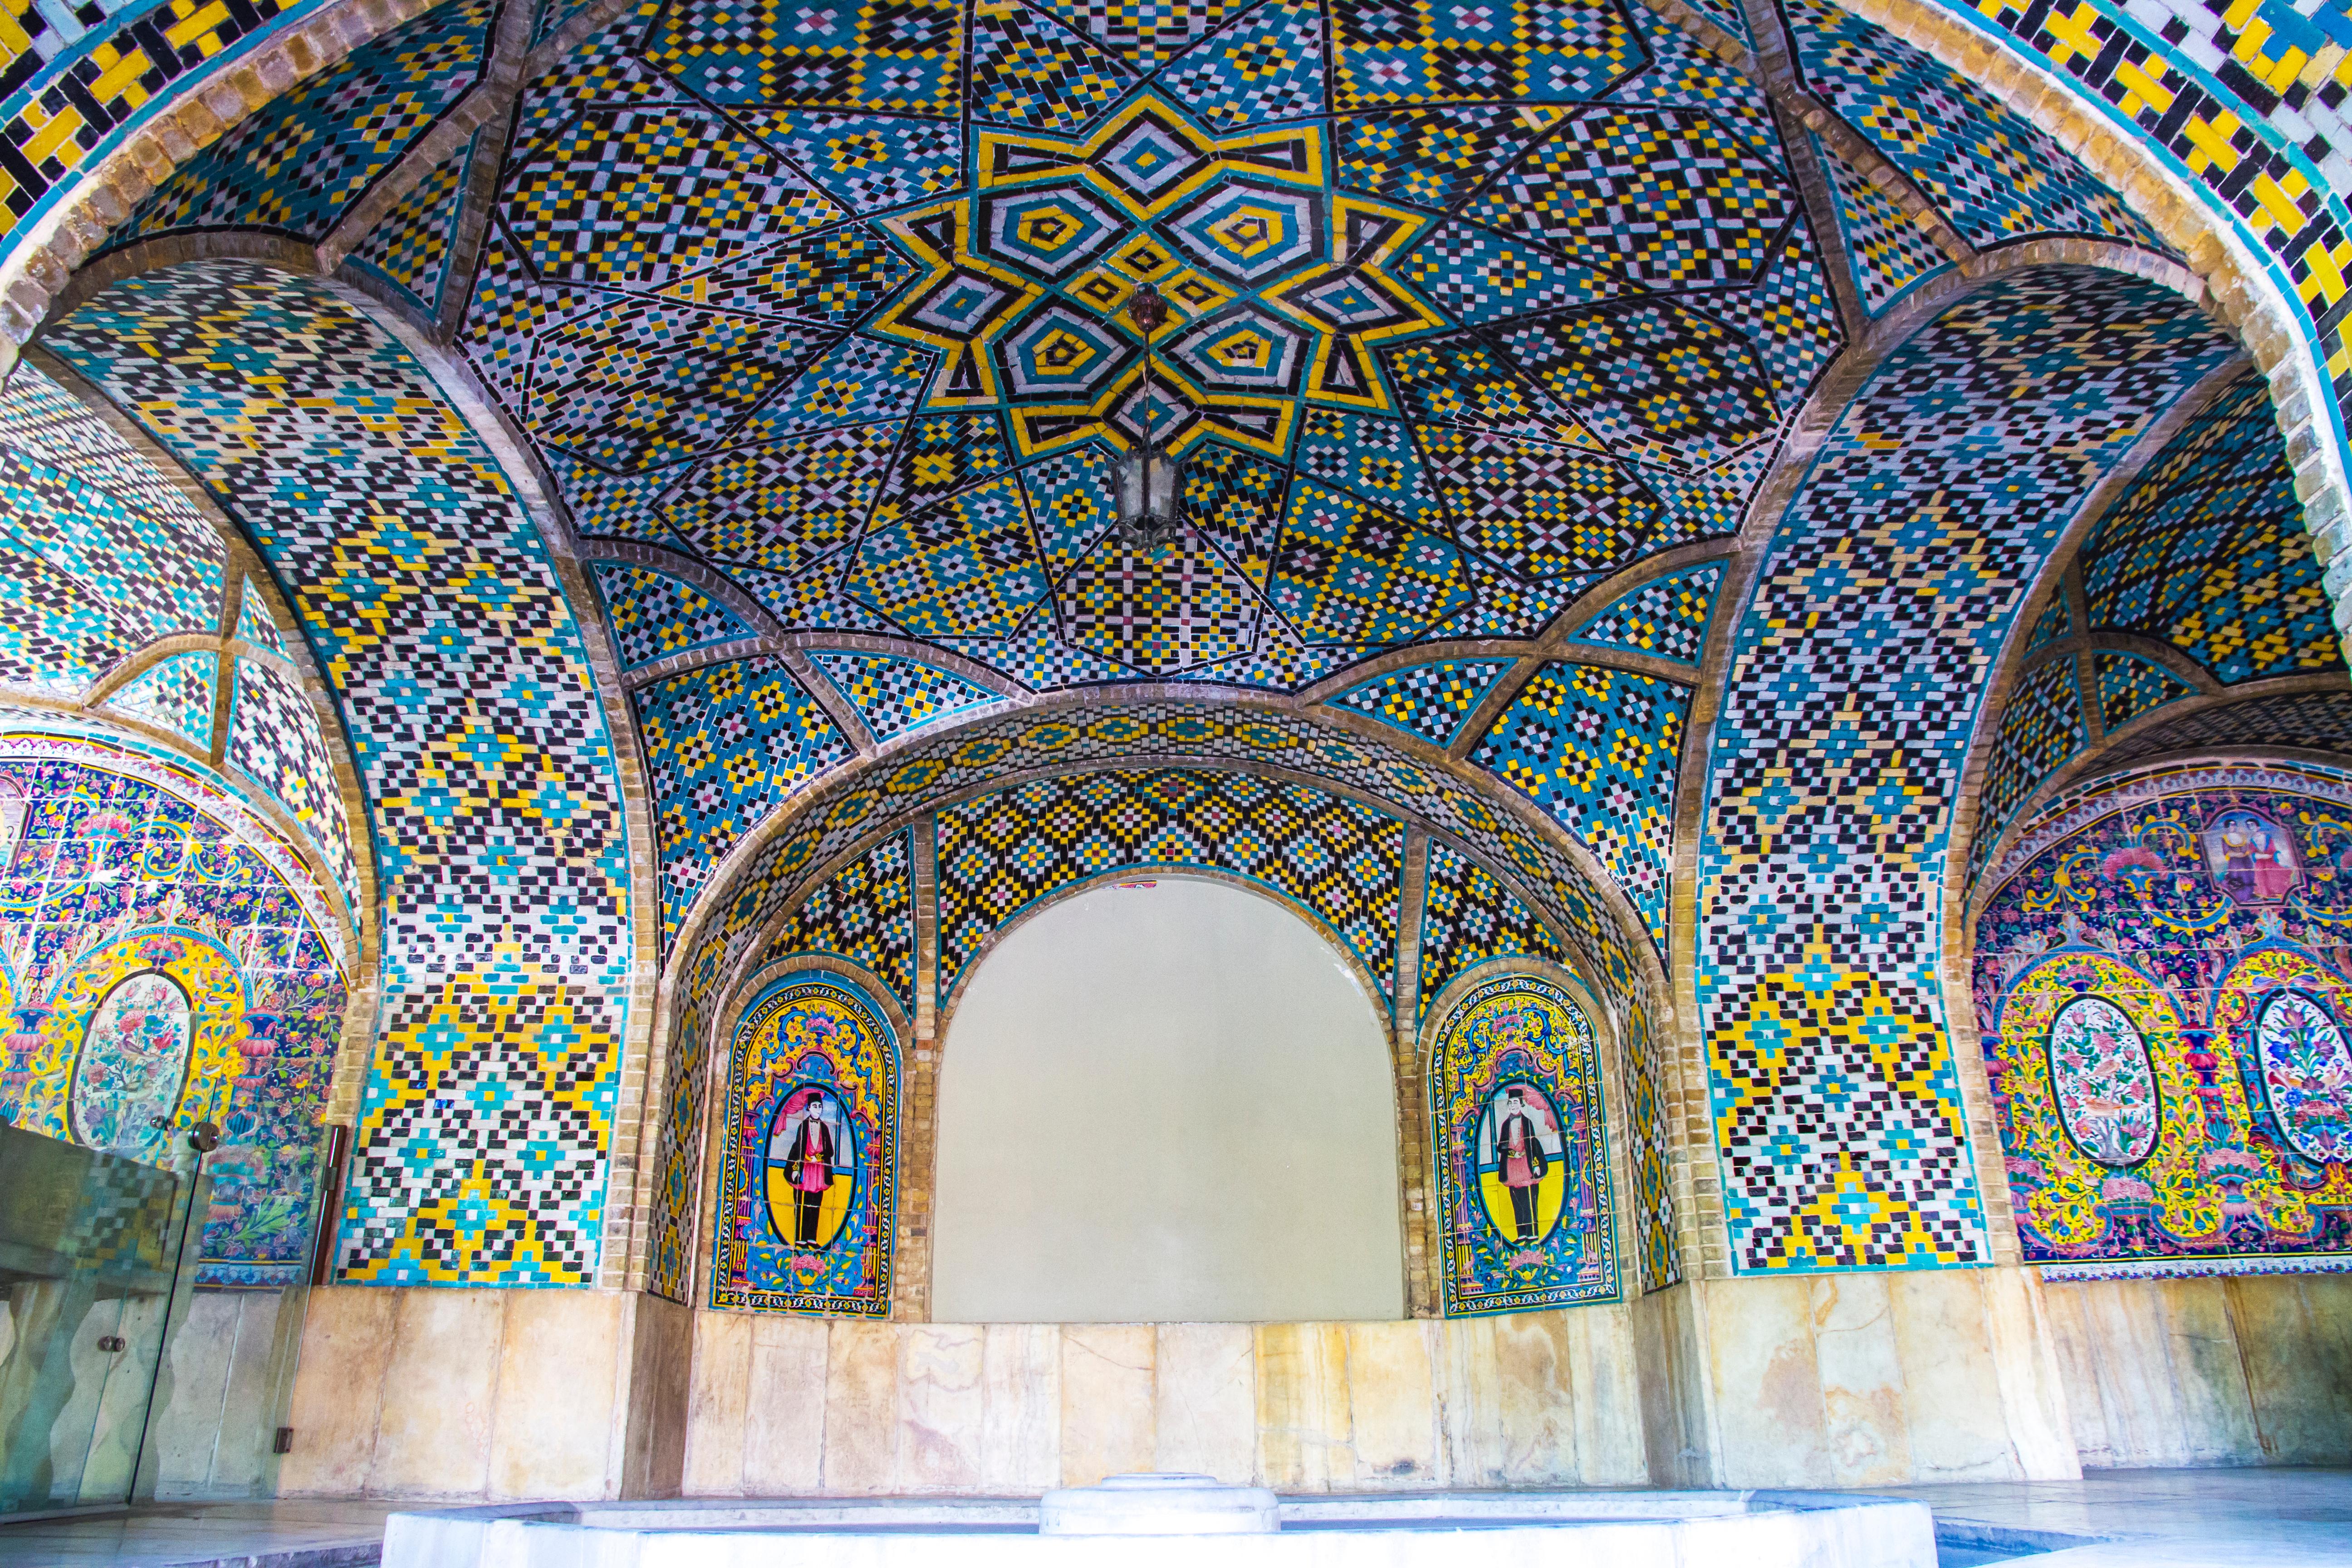 Arched ceiling adorned with colorful tiles at Golestan palace